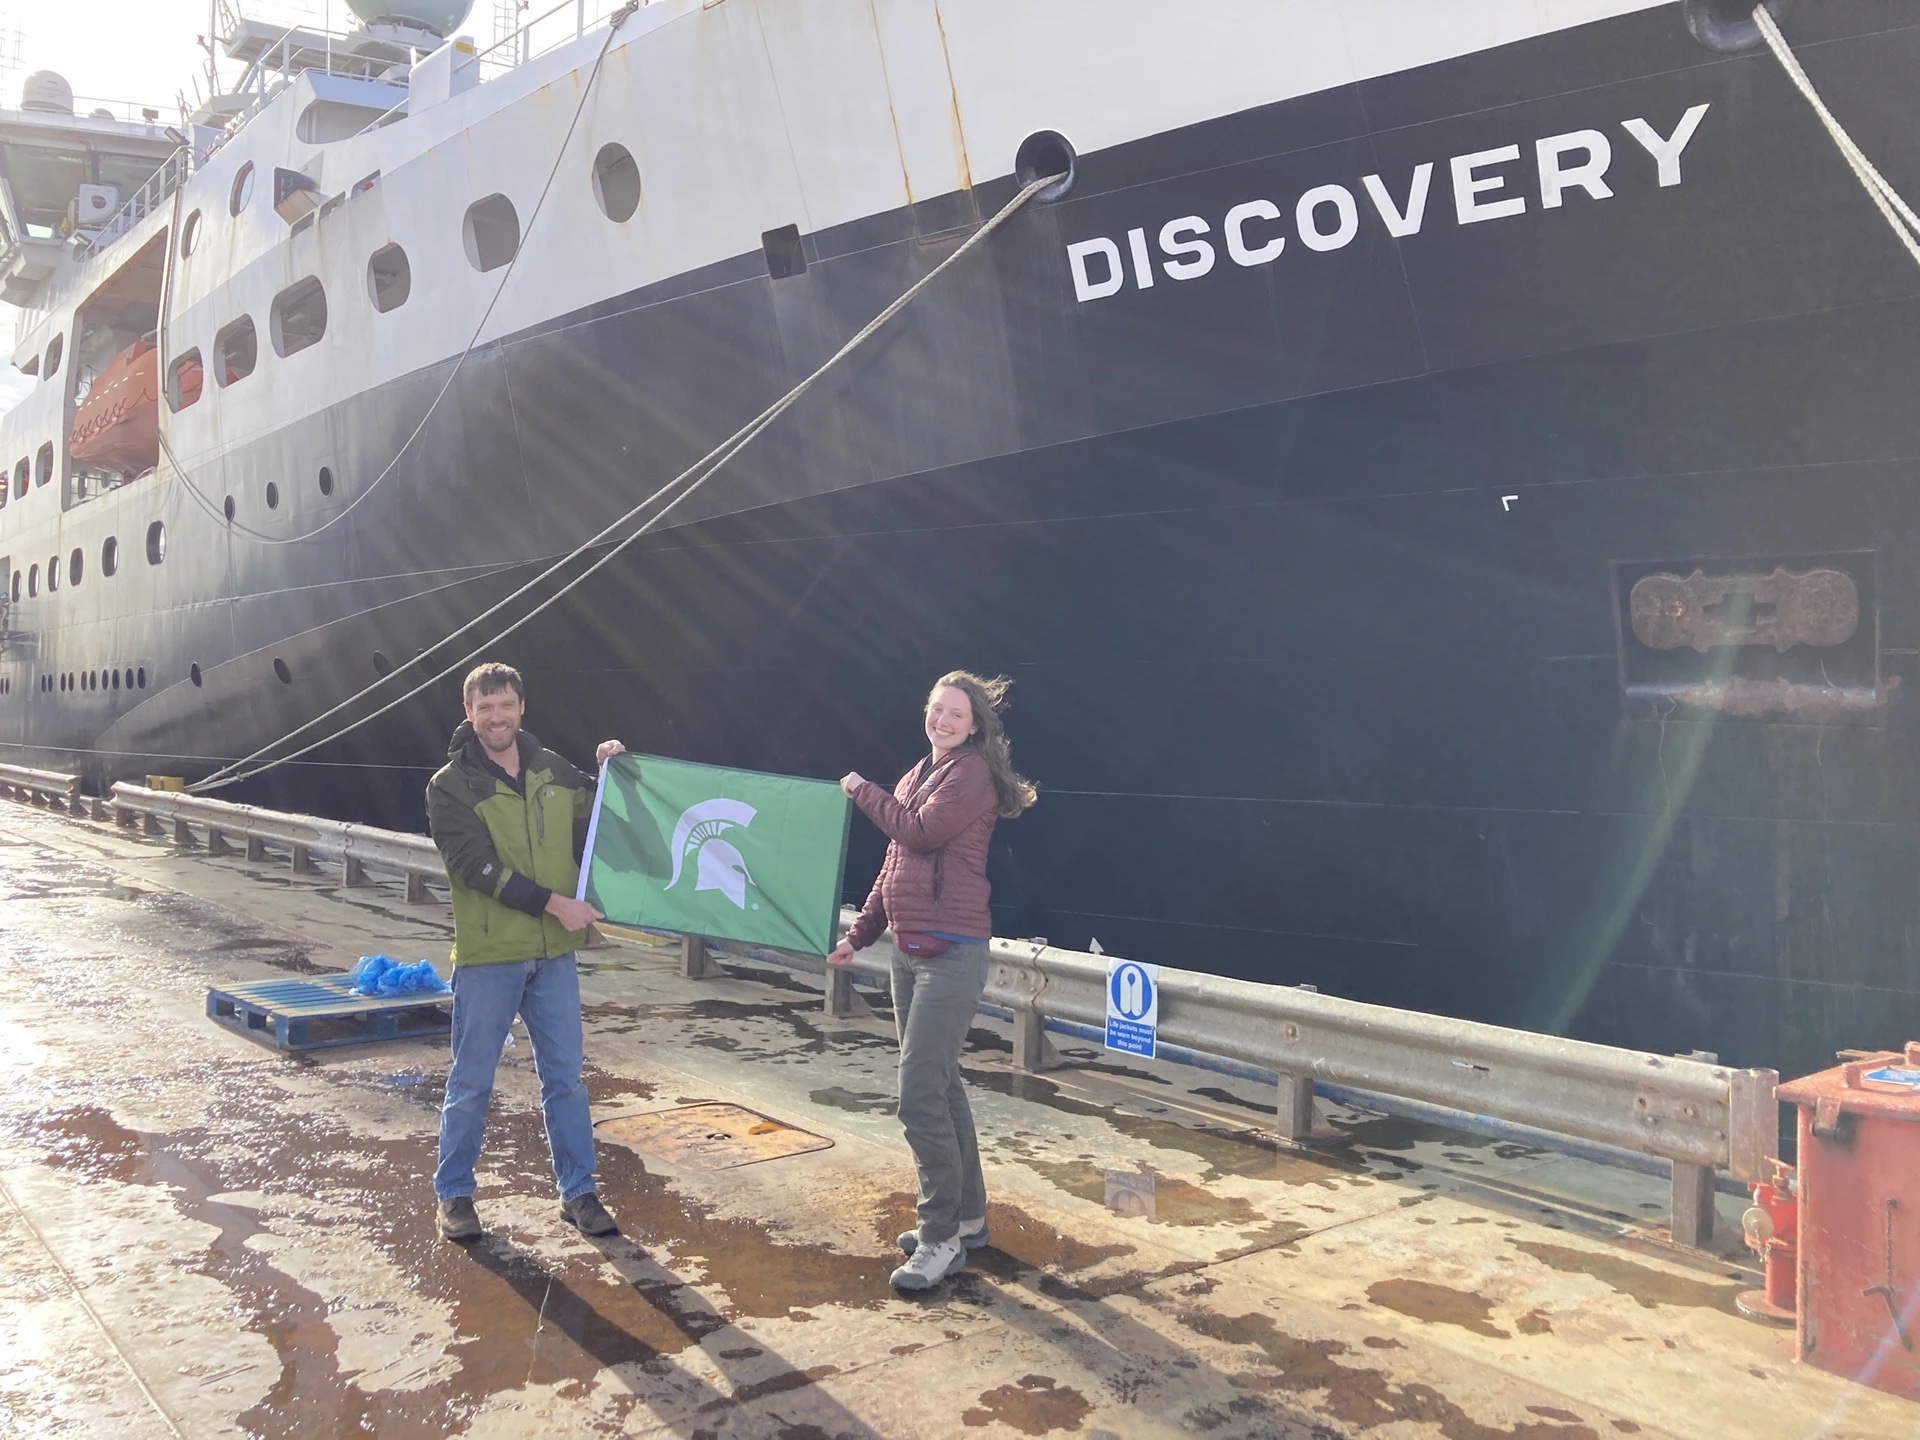 Dalton Hardisty and Kirsten Fentzke in front of HMS Discovery